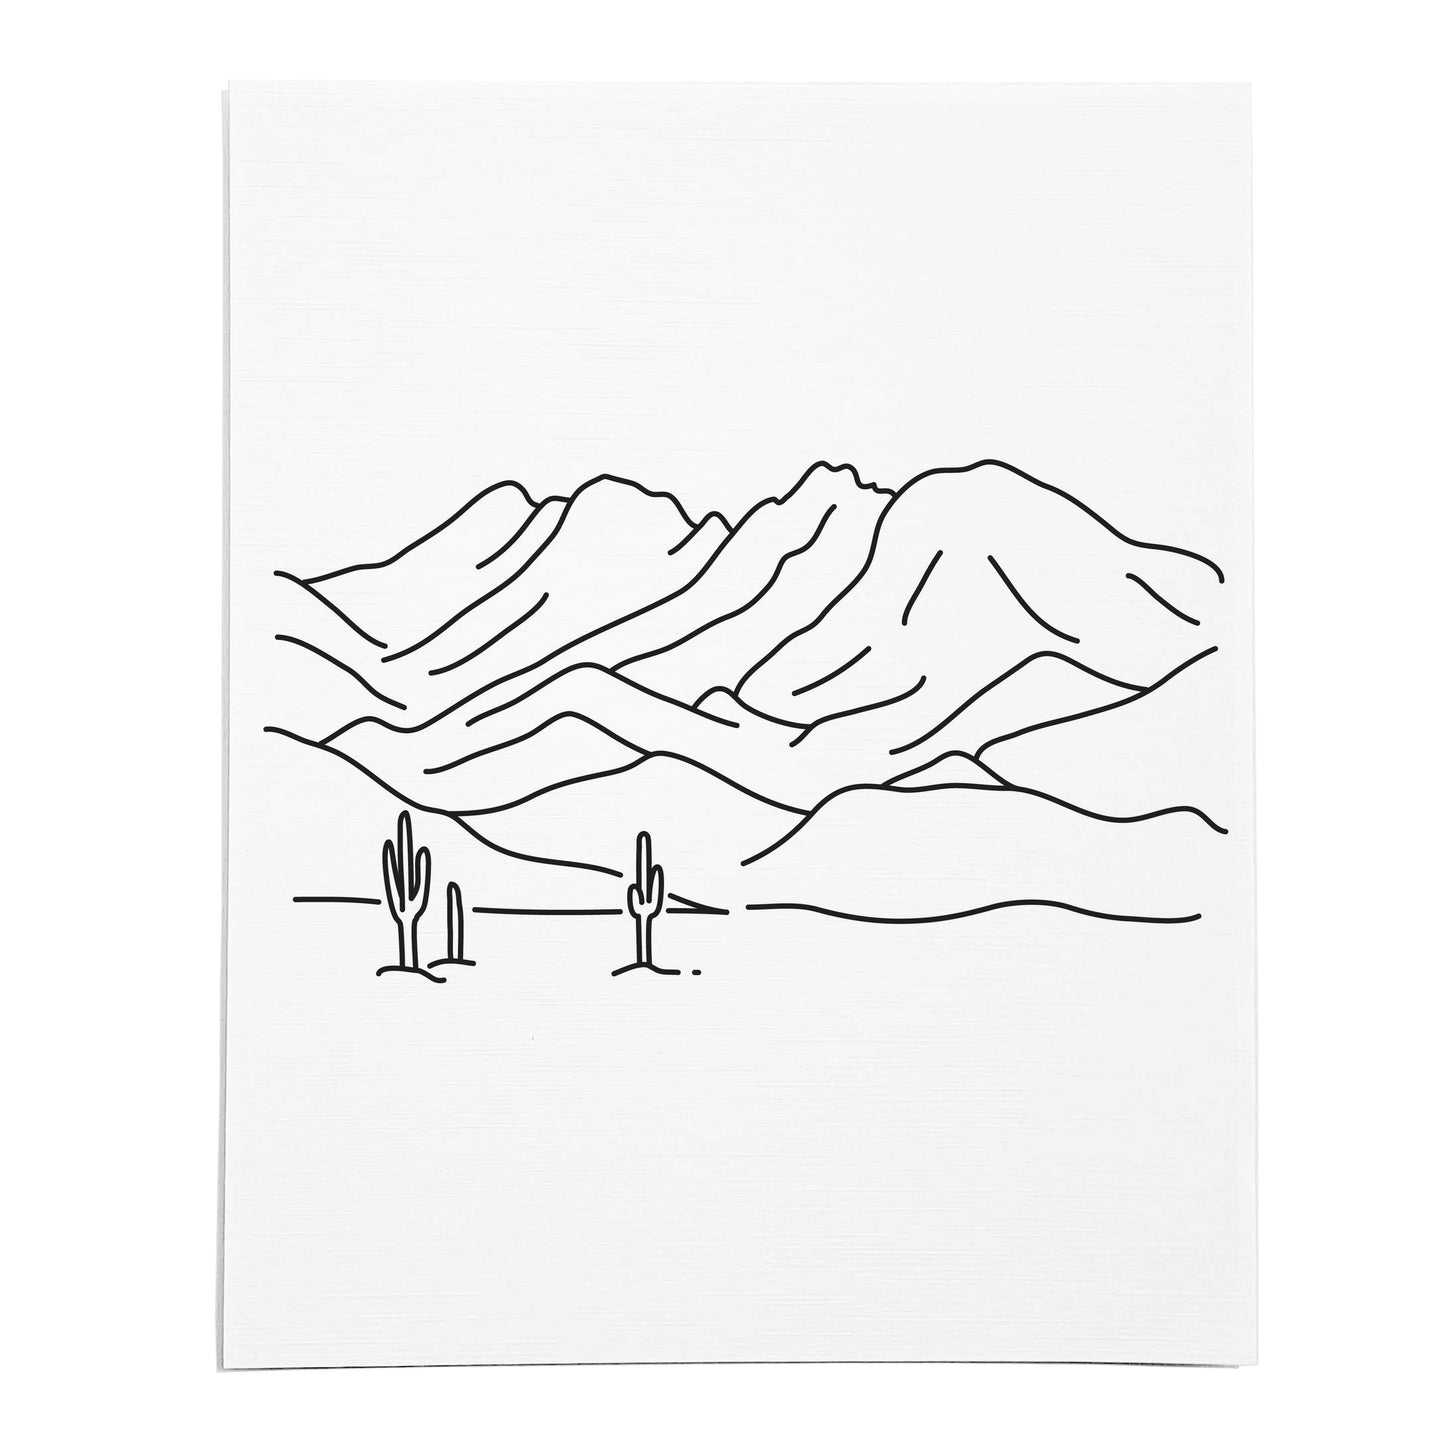 An art print featuring a line drawing of the Four Peaks on white linen paper